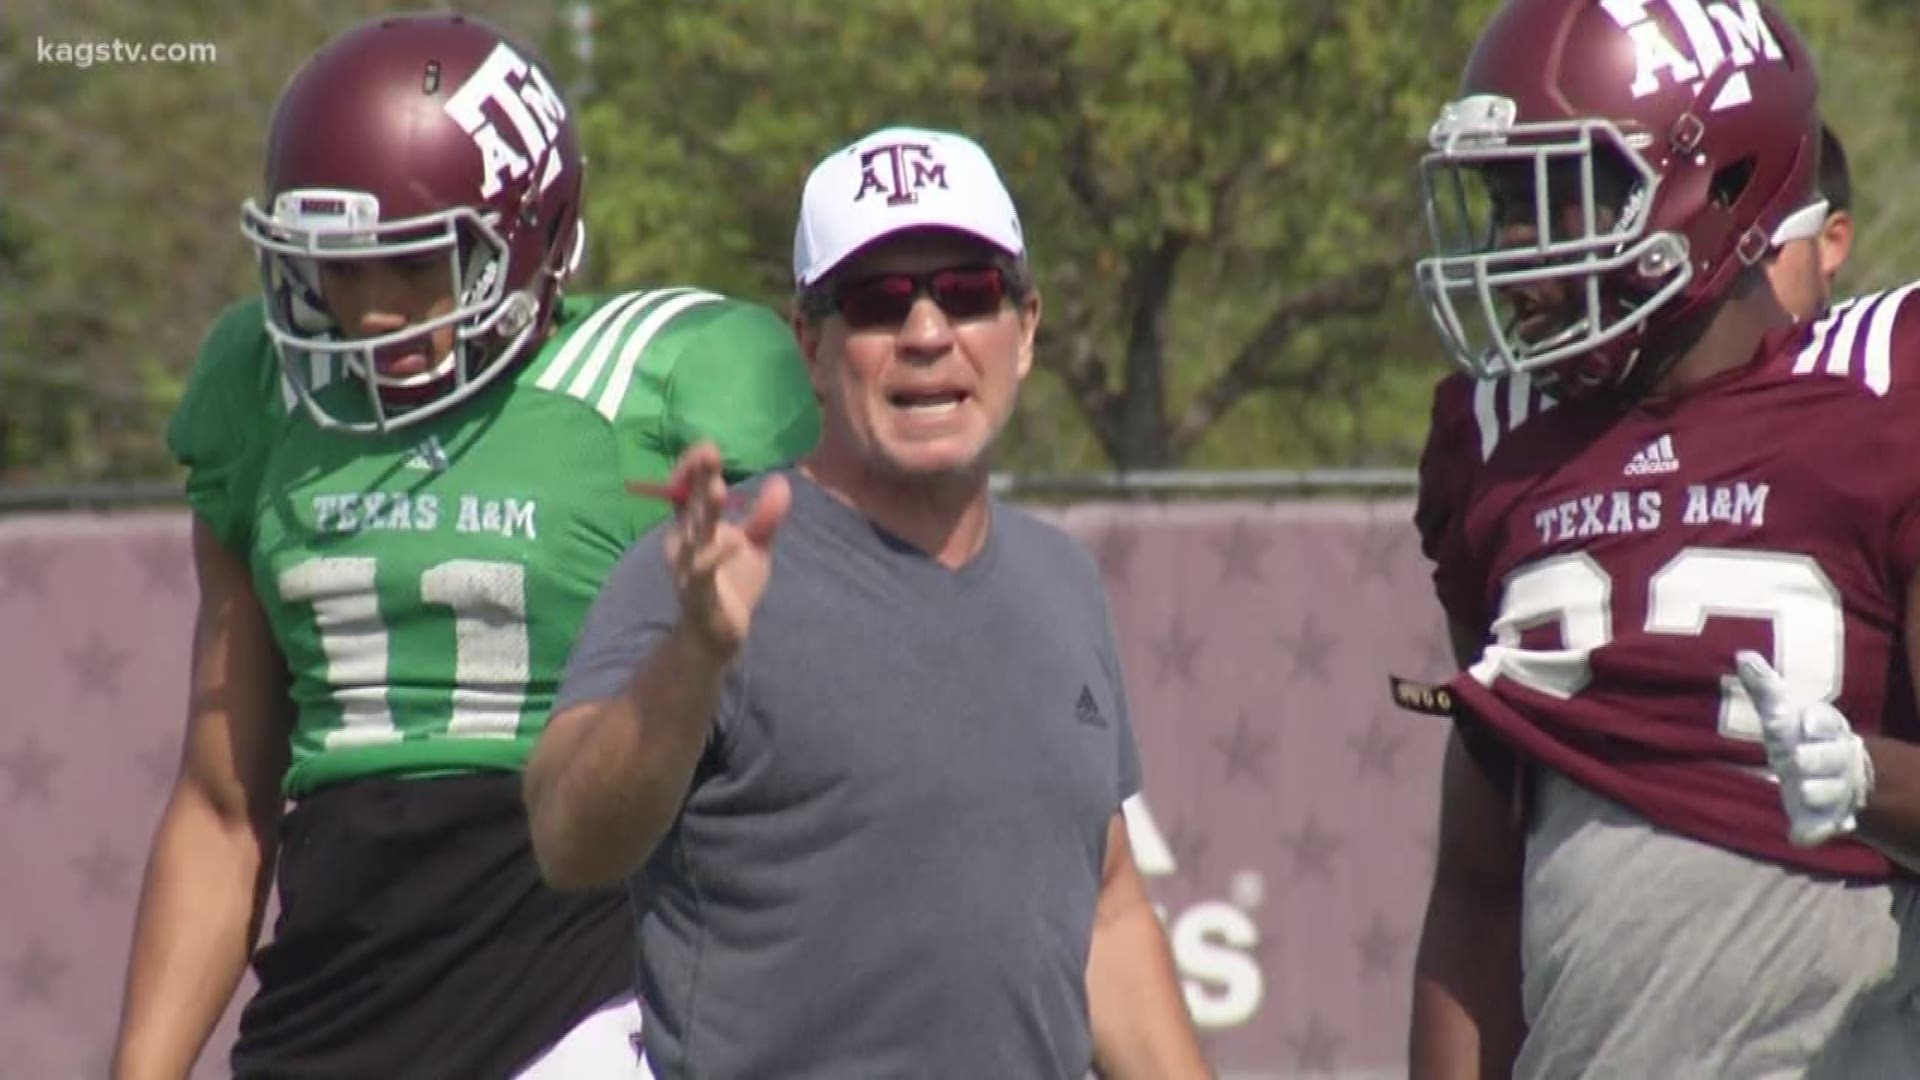 Texas A&M will have a pair of new tight ends in 2019 after the departure of Jace Sternberger and Trevor Wood. Early on during spring practice, Glenn Beal is taking reps with the first team, but five star recruit and true freshman Baylor Cupps figures to play a big role as well.